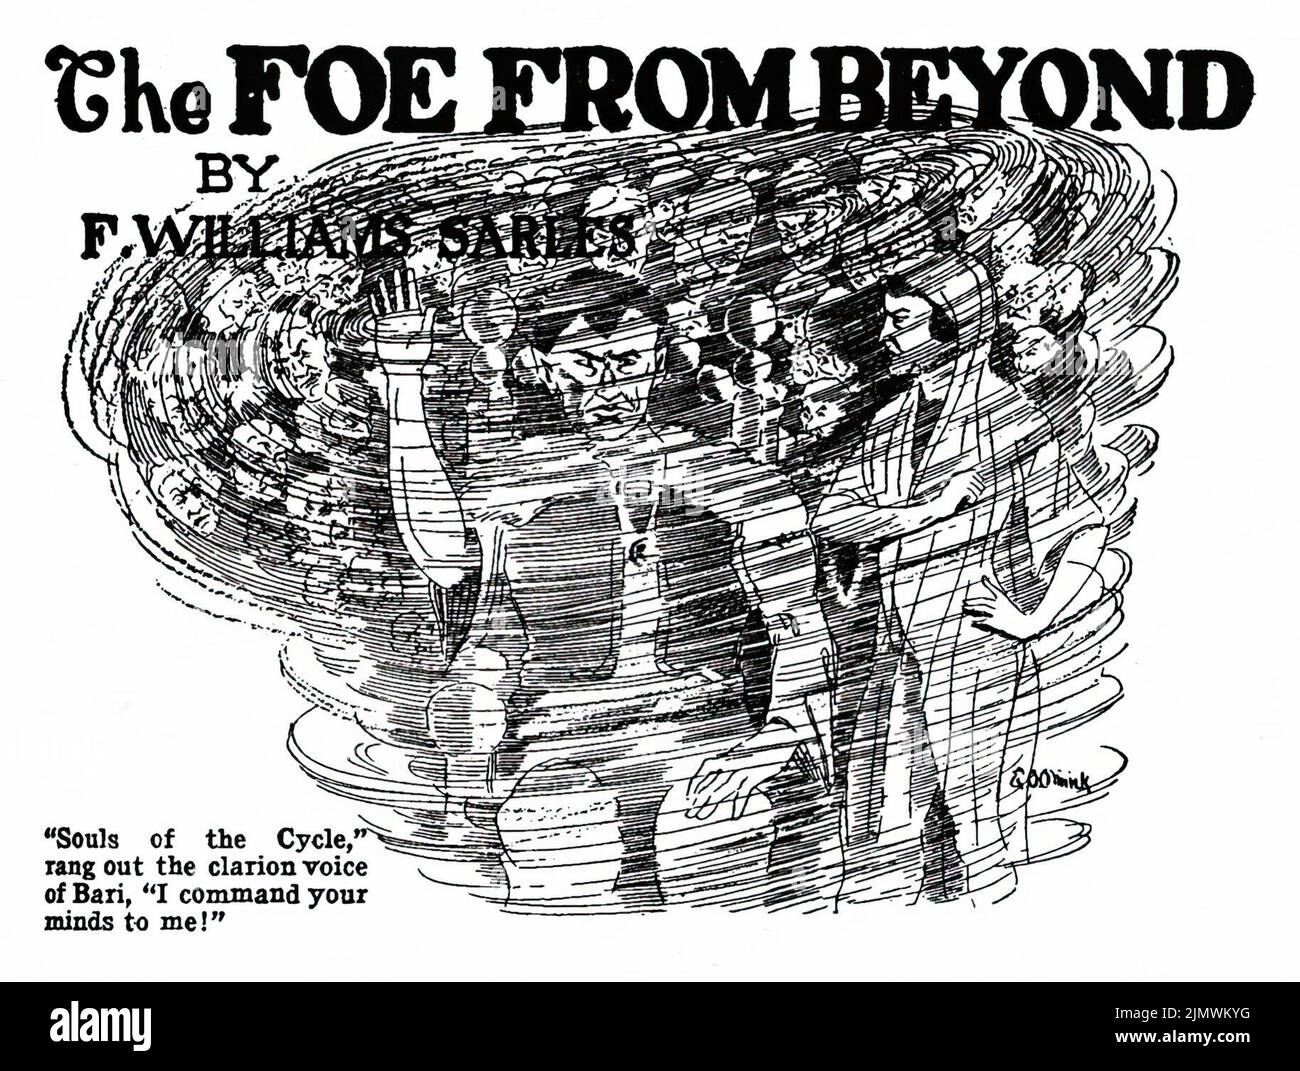 The Foe From Beyond, by F. Williams Sarles. Illustration by G. O. Olinick from Weird Tales, December 1926 Stock Photo